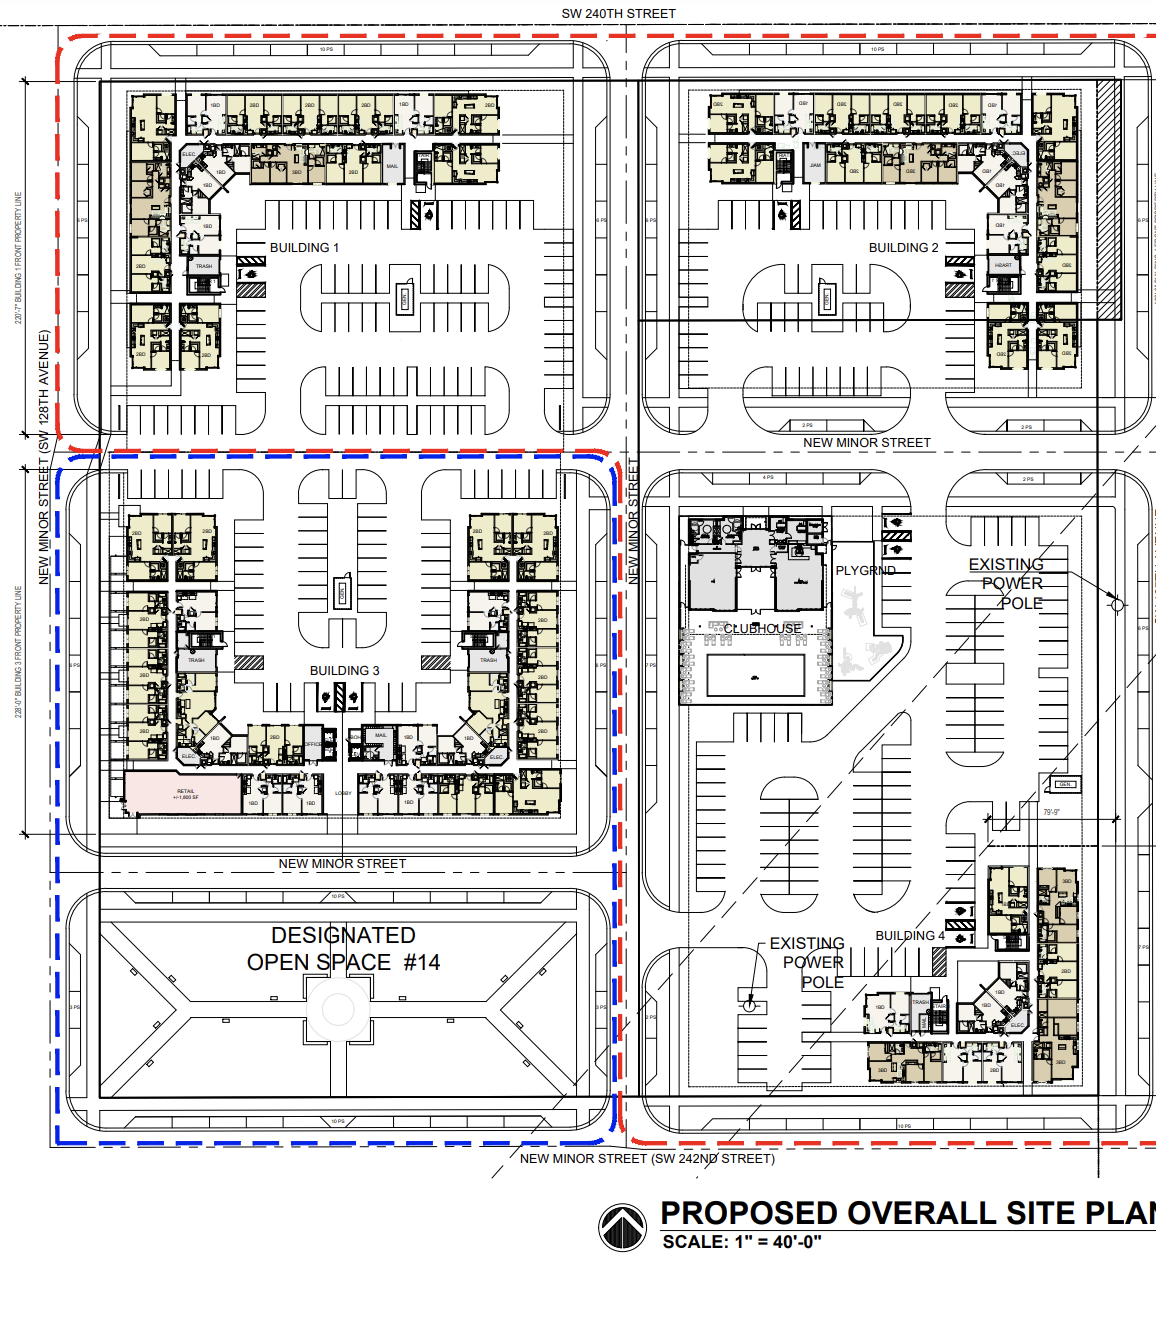 Overall Site Plan. Courtesy of